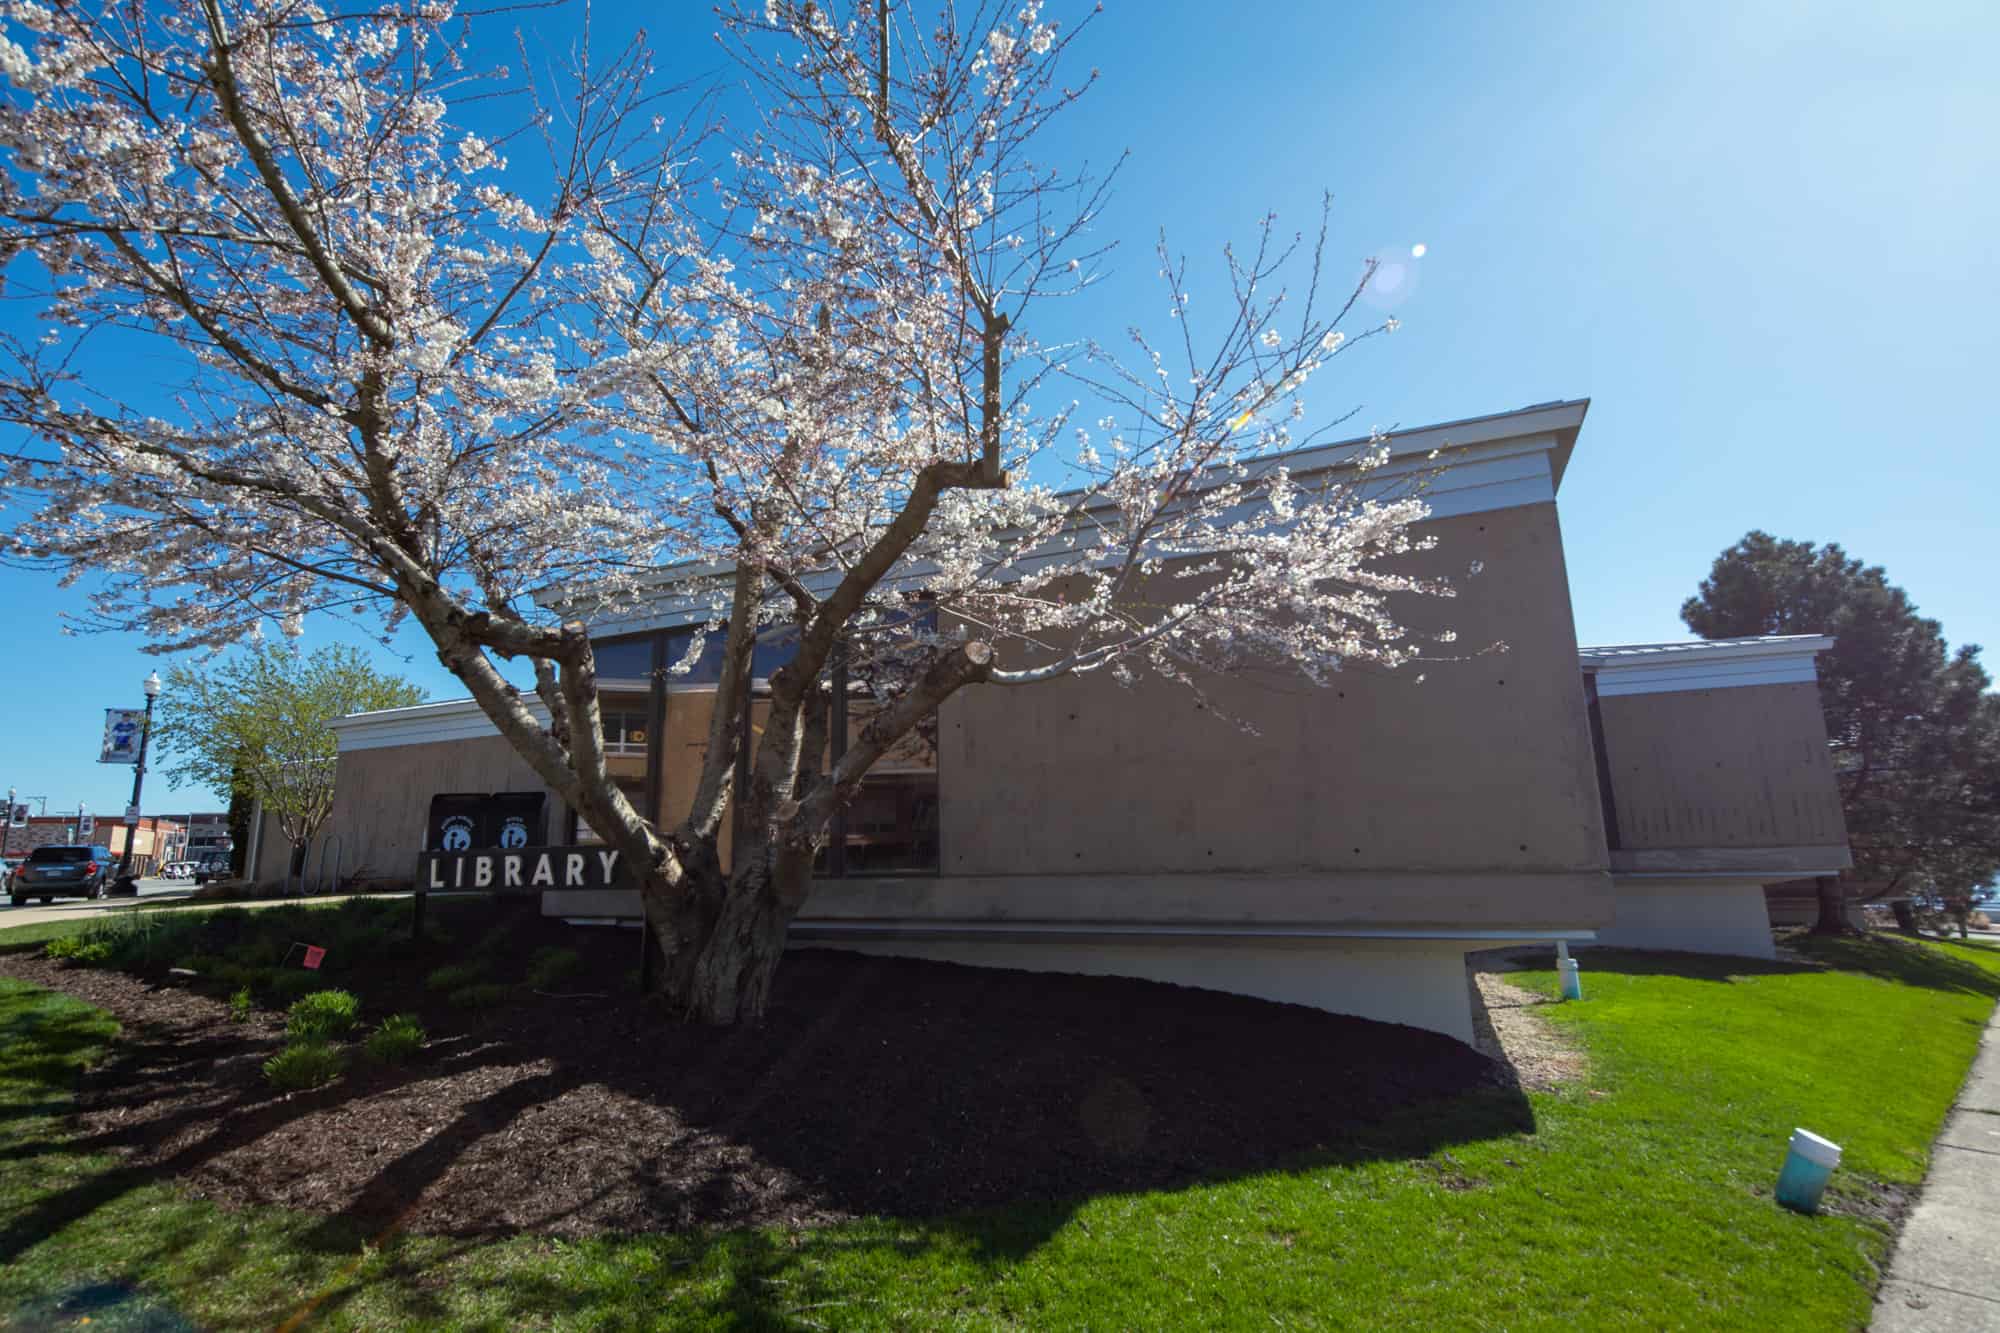 Hobart's branch of the Lake County Public Library, where spring blossoms on a tree are just beginning to appear.